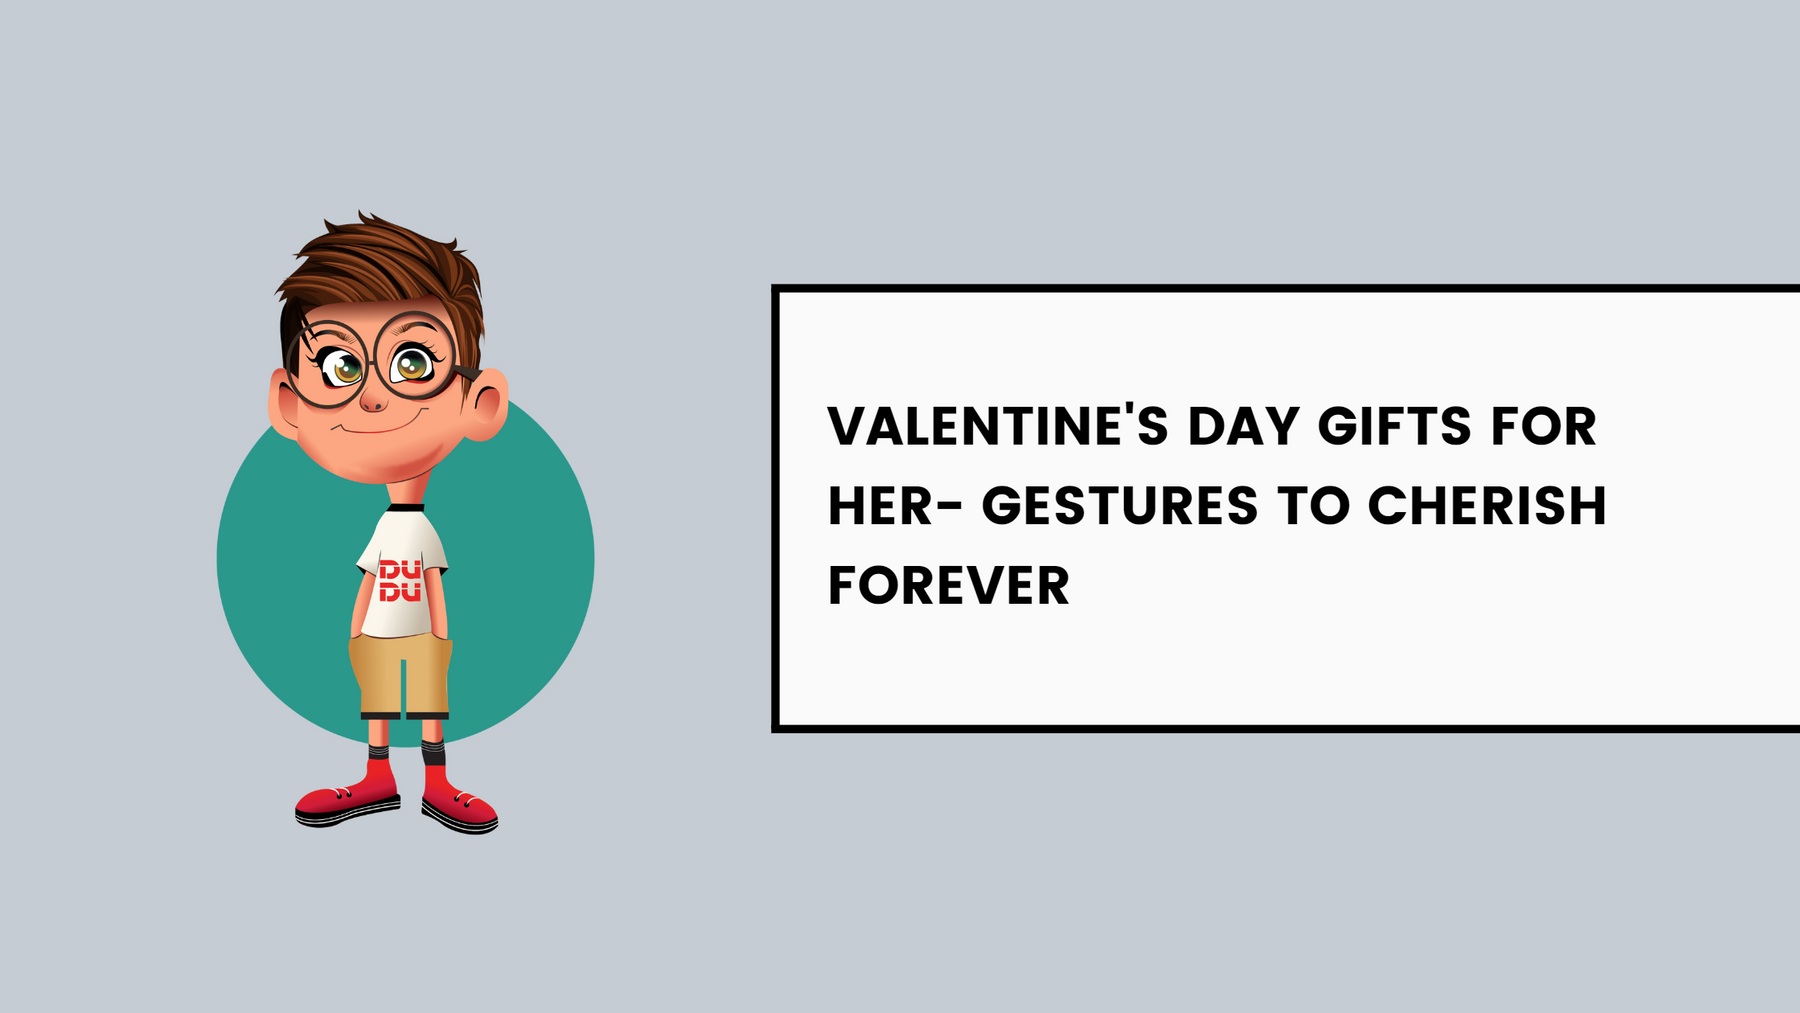 Valentine's Day Gifts for Her- Gestures to Cherish Forever